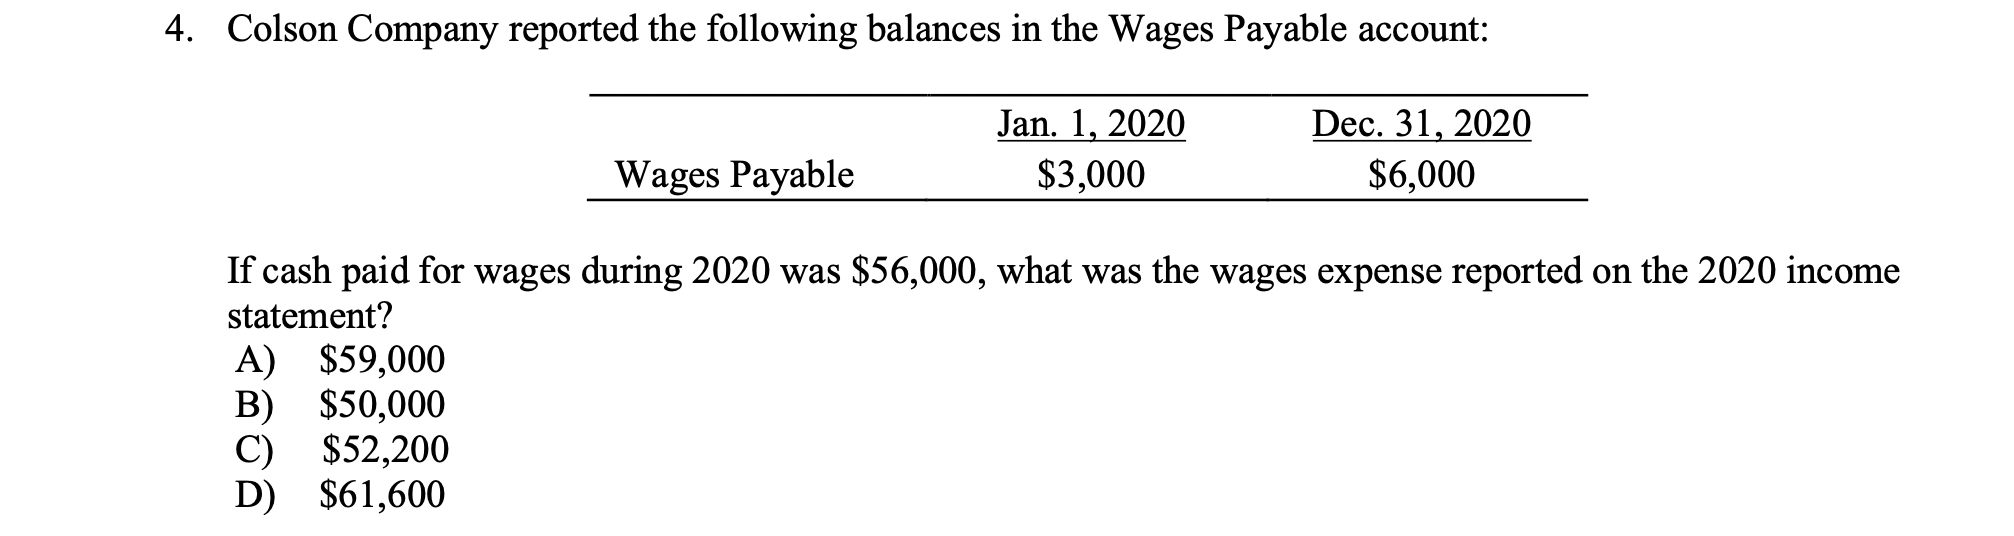 4. Colson Company reported the following balances in the Wages Payable account:Jan. 1, 2020$3,000Dec. 31, 2020$6,000Wage